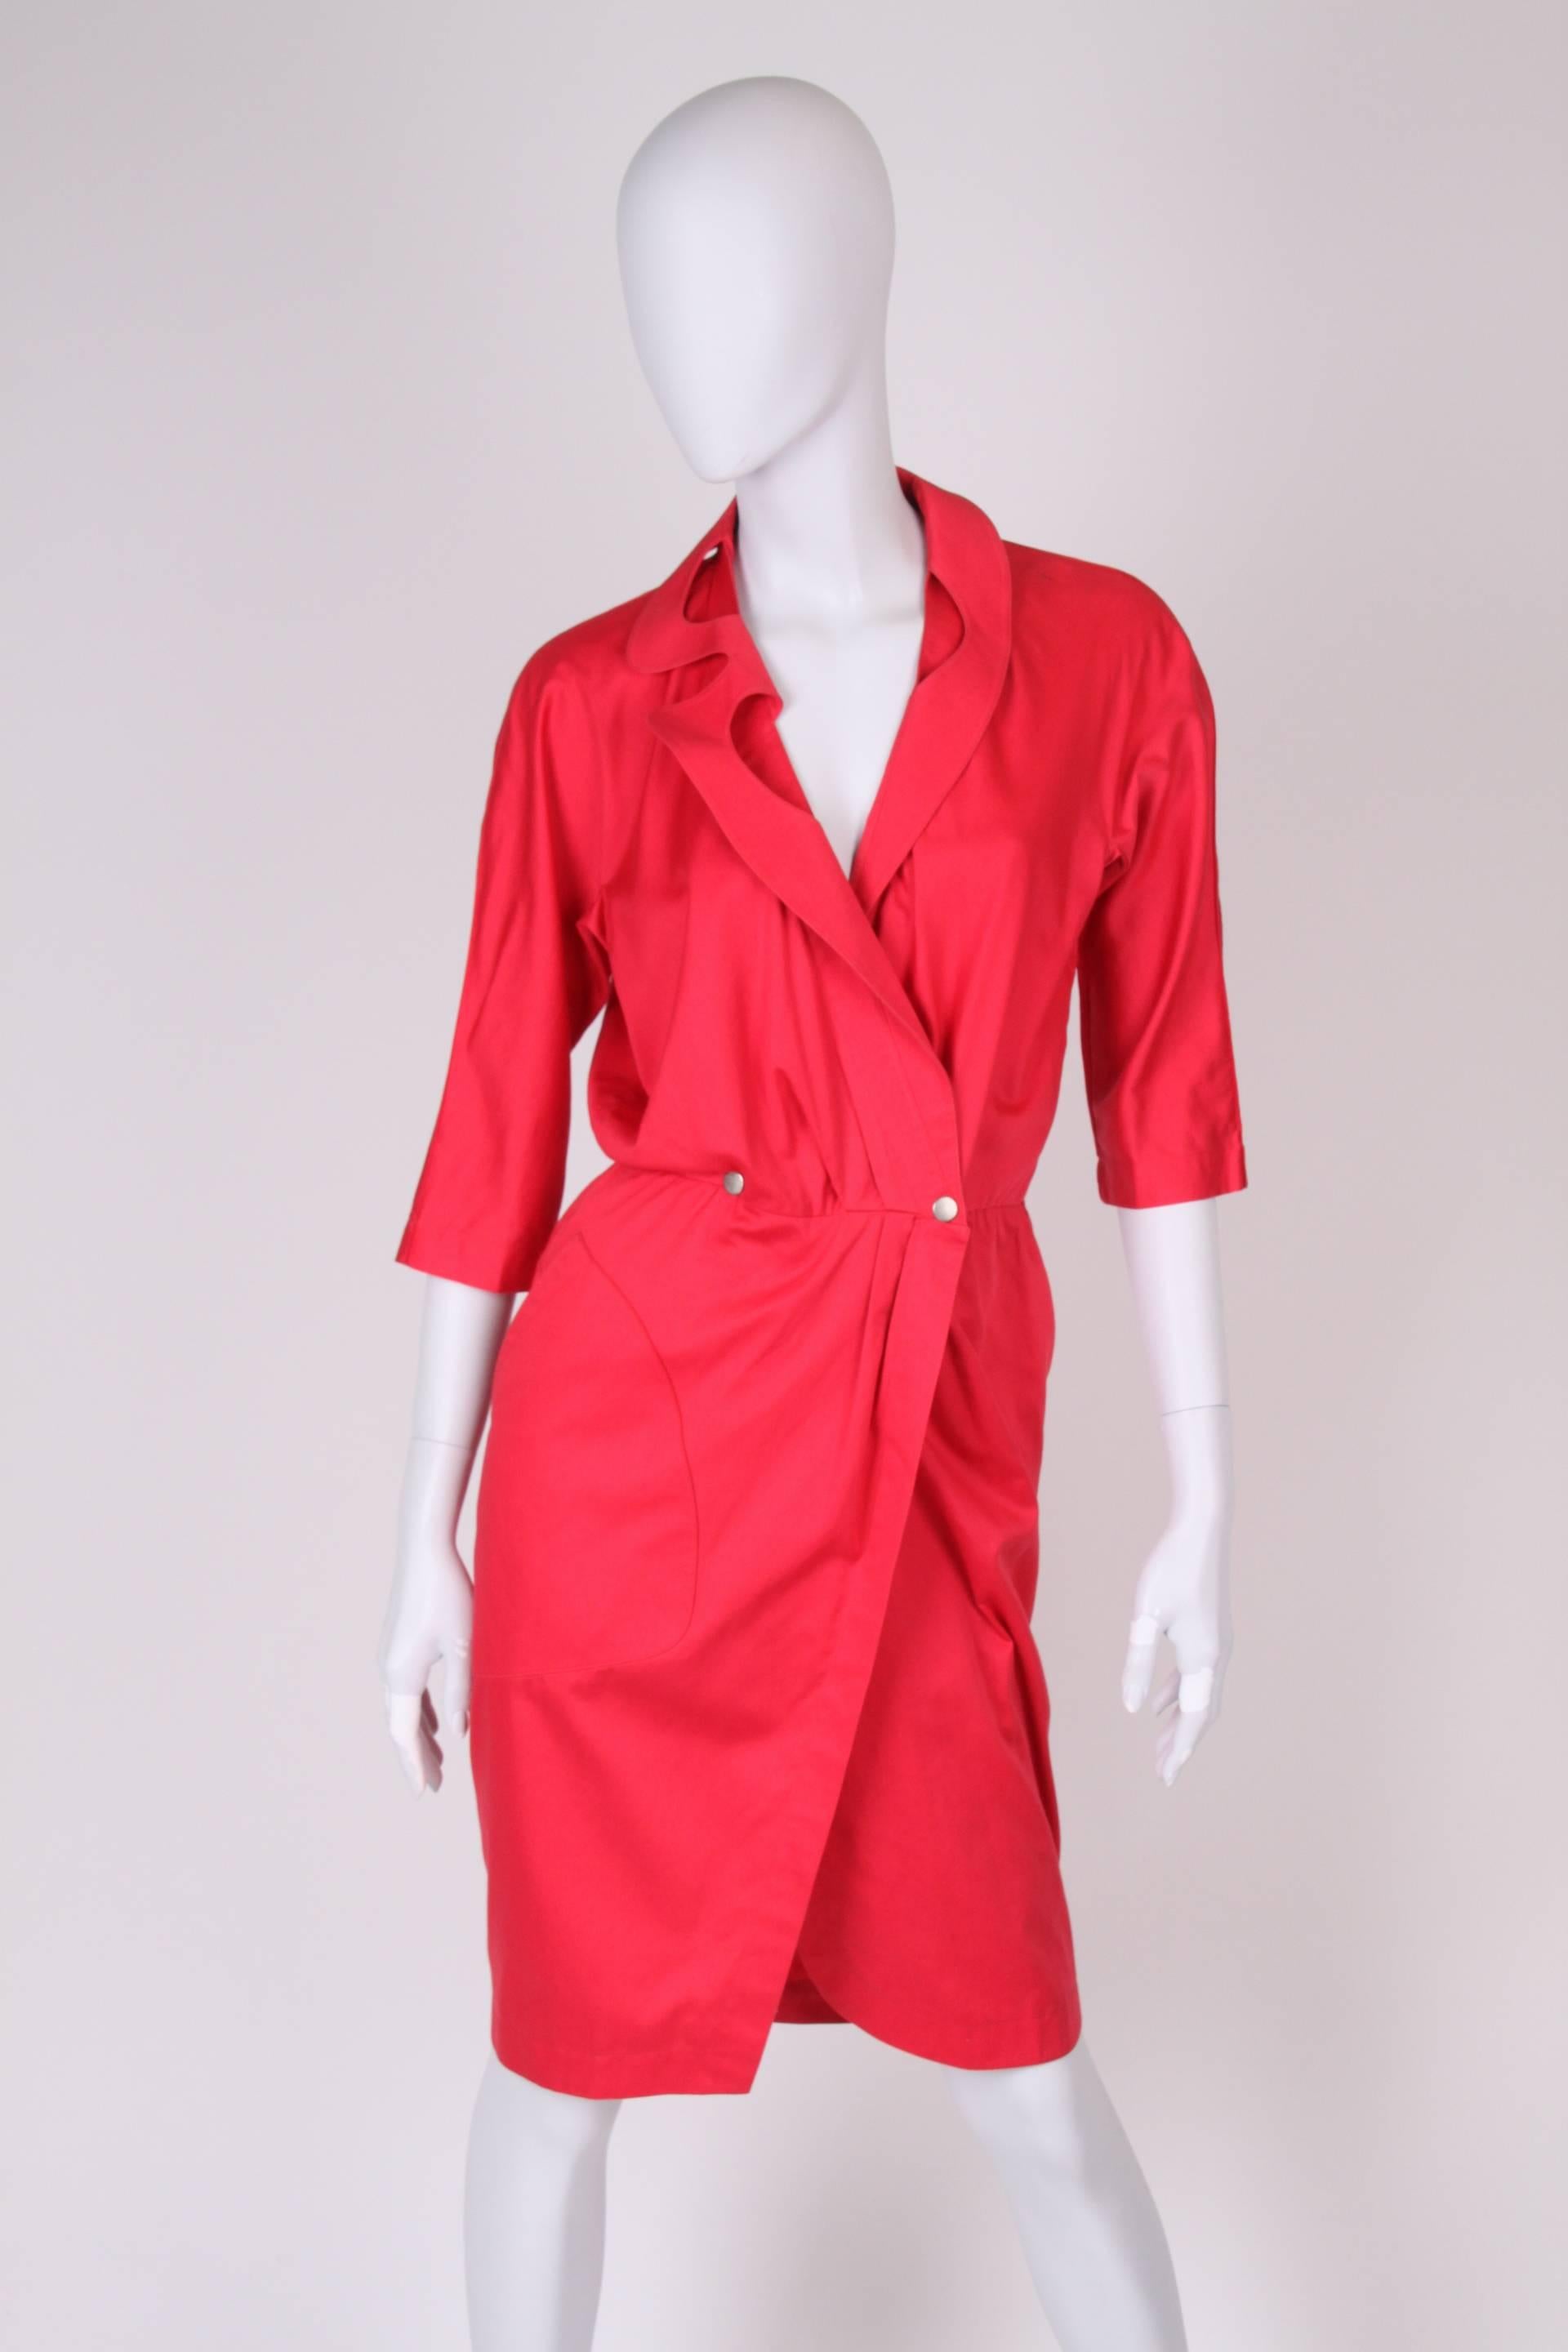 Raspberry red dress by Thierry Mugler from the eighties, this one shines right at you!

This cotton dress has a little bit more than knee-length and typical Mugler lapels with some cleavage. Waist closure with two matte silver push buttons. 3/4